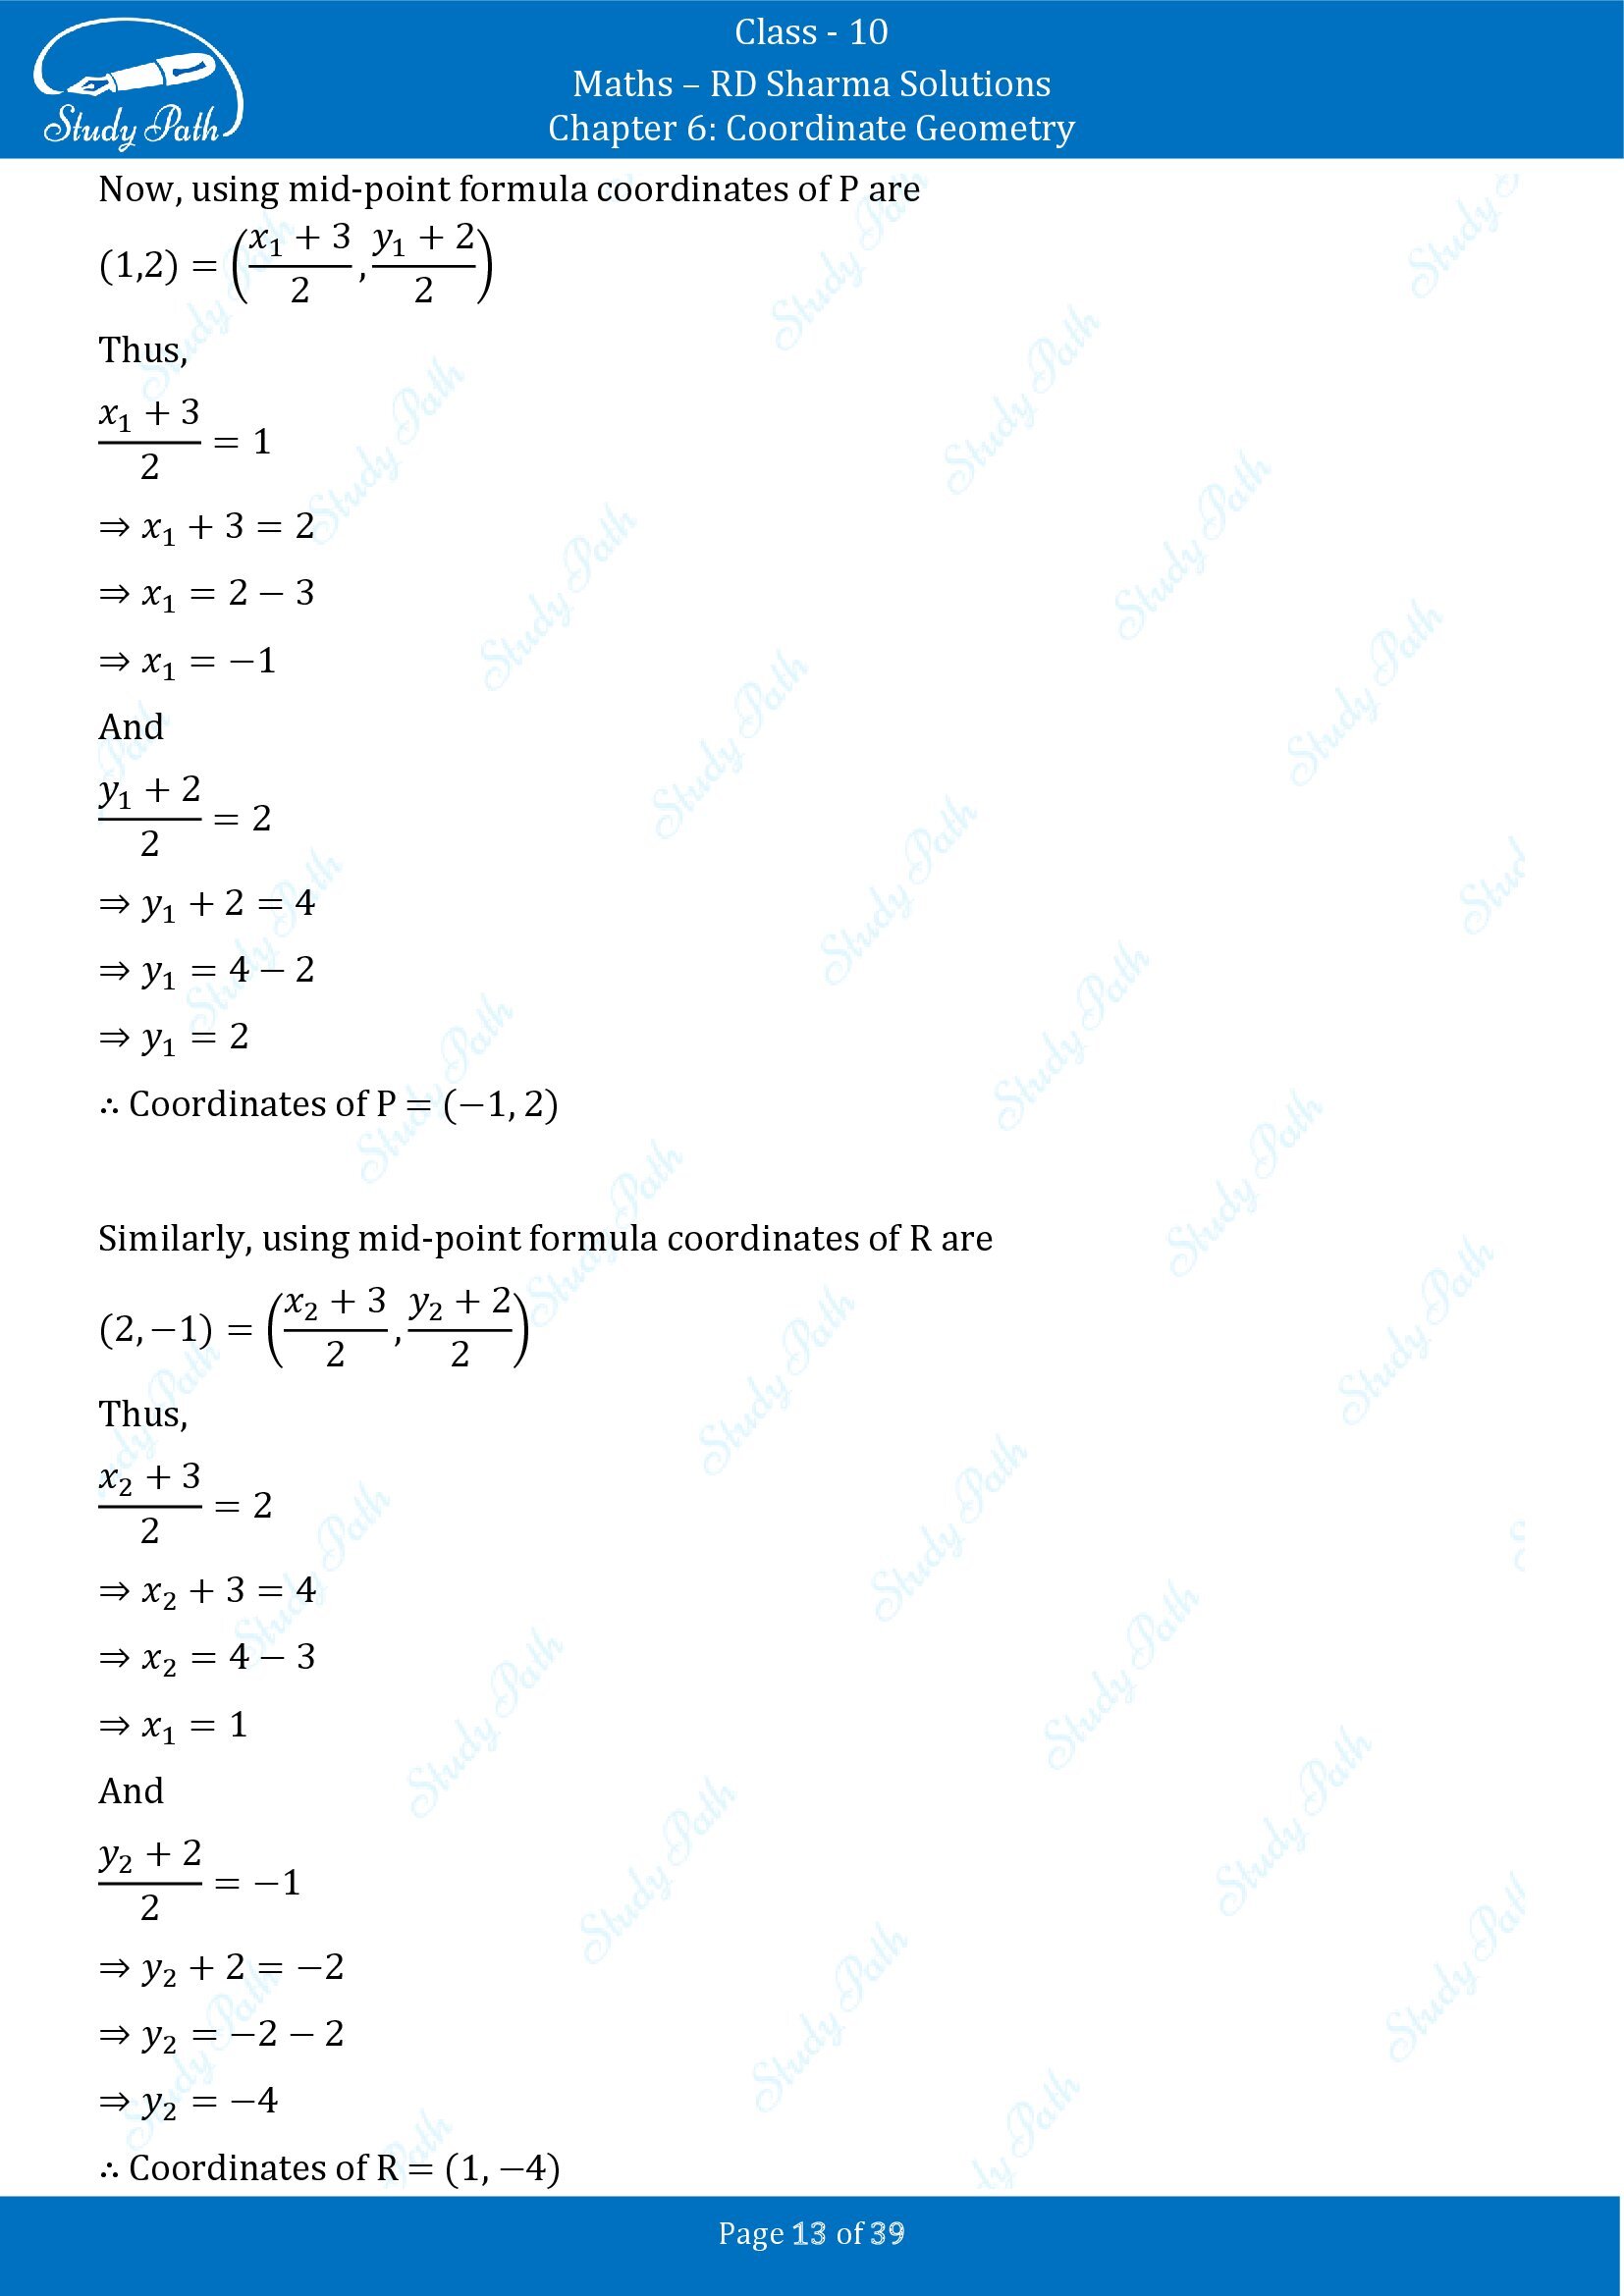 RD Sharma Solutions Class 10 Chapter 6 Coordinate Geometry Exercise 6.5 0013